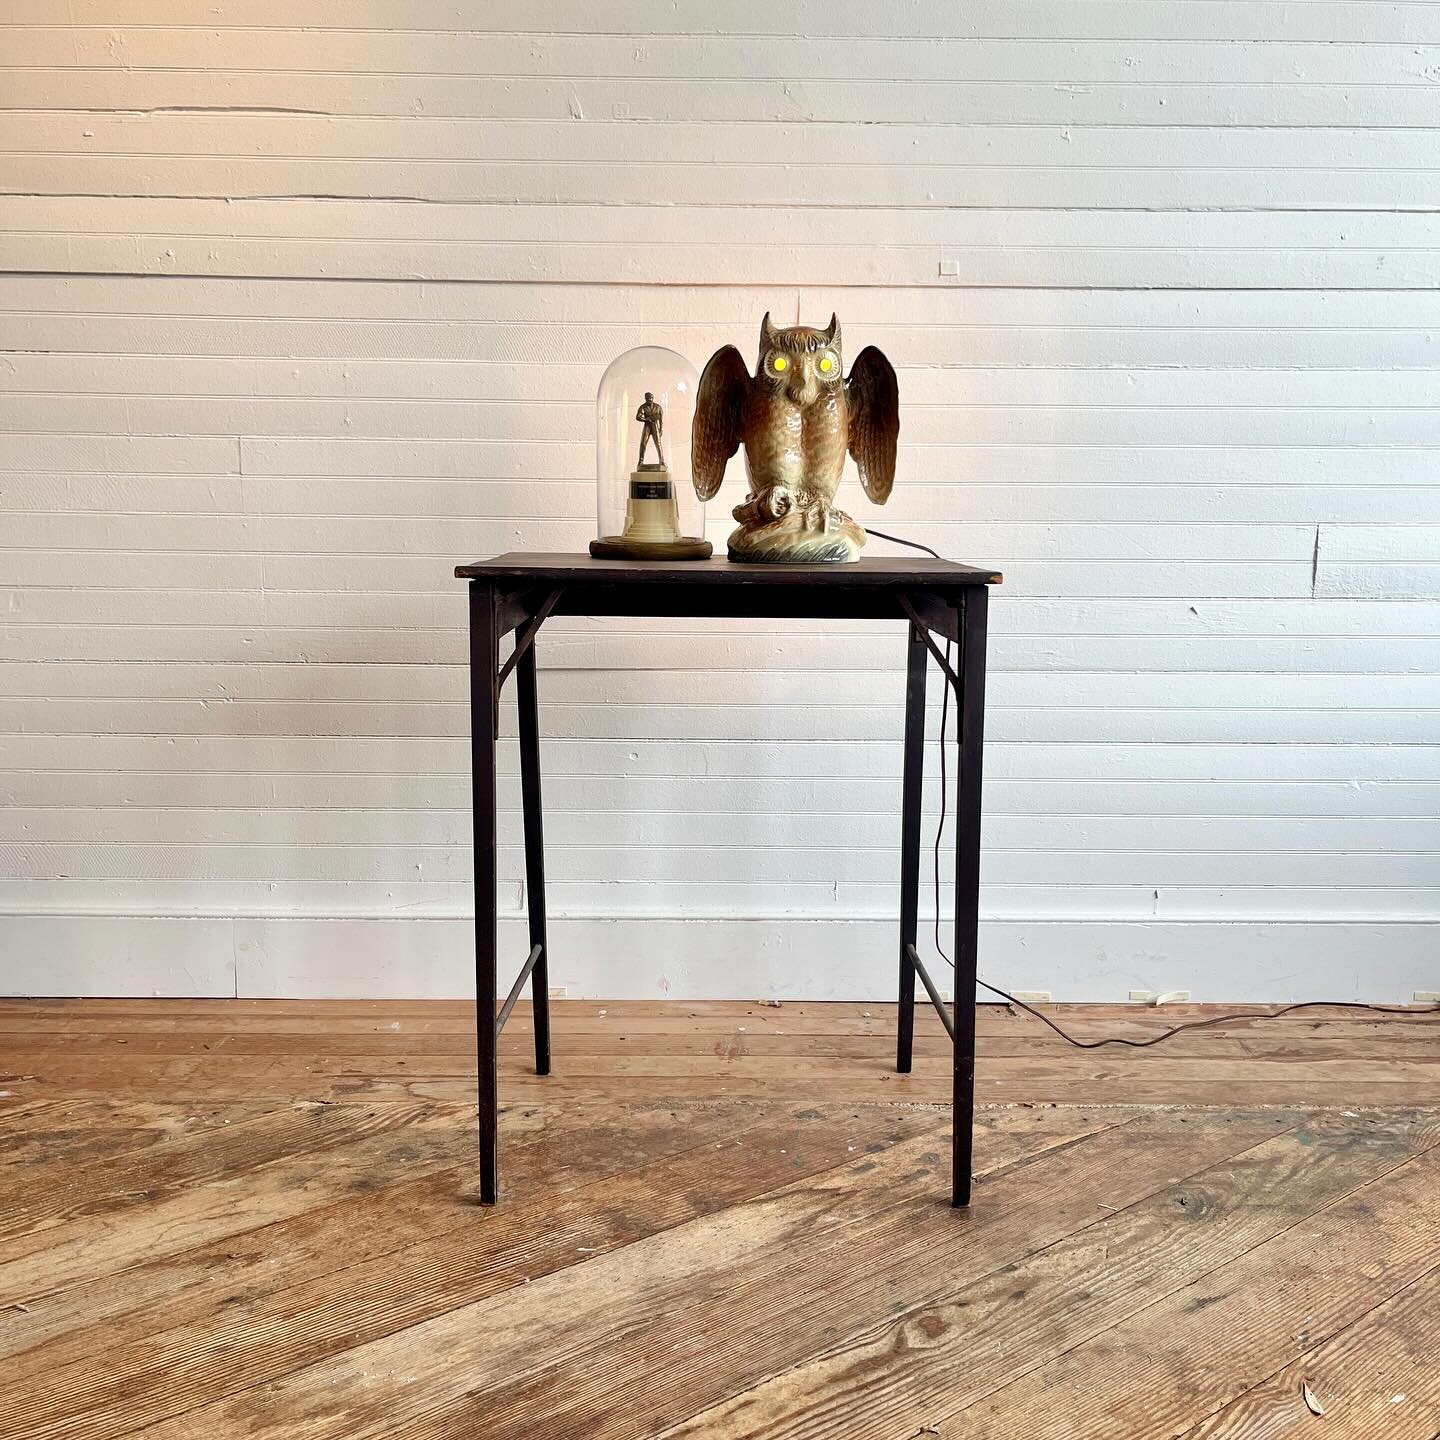 Dainty vintage table / stand. Lots of wear to surface and crack as shown.

28.25&rdquo;t x 22.75&rdquo;l x 17.25&rdquo; w

$65 DM to purchase 

Owl TV lamp by Howard Kron 
$95